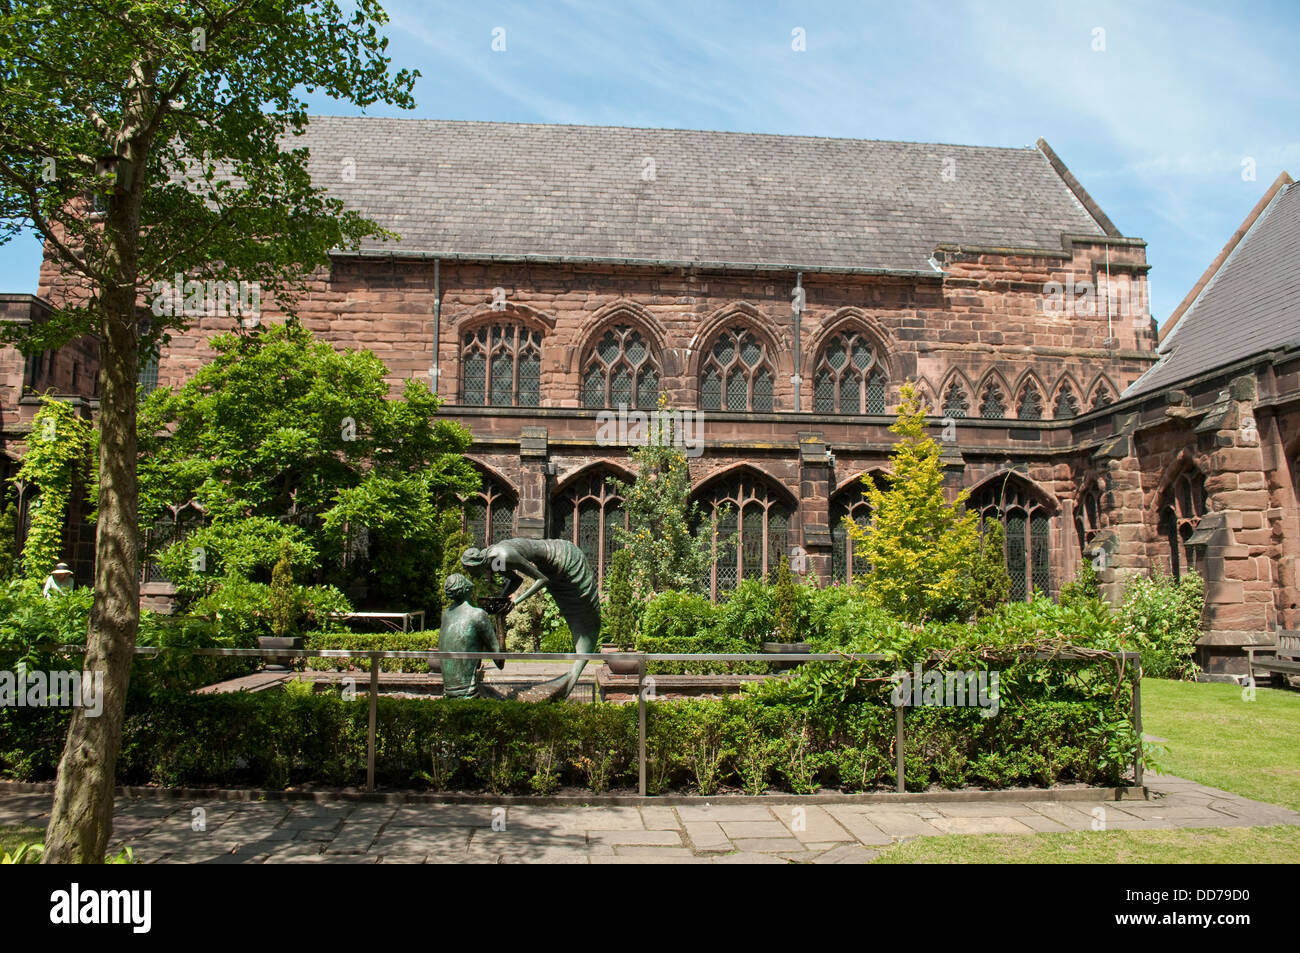 Cloister garth with sculpture 'The water of life' by Stephen Broadbent, Chester Cathedral, Chester, UK Stock Photo